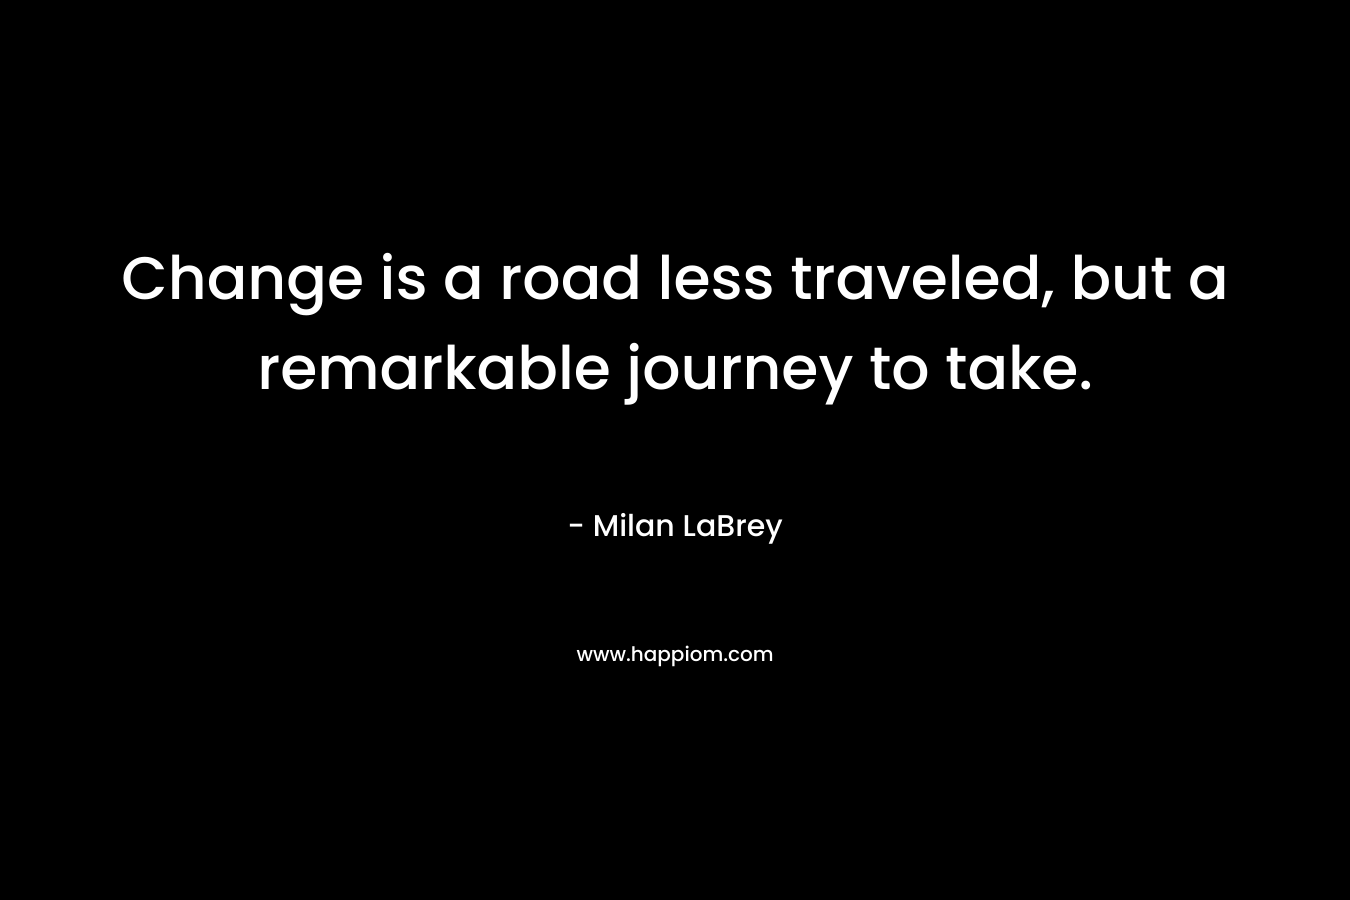 Change is a road less traveled, but a remarkable journey to take.